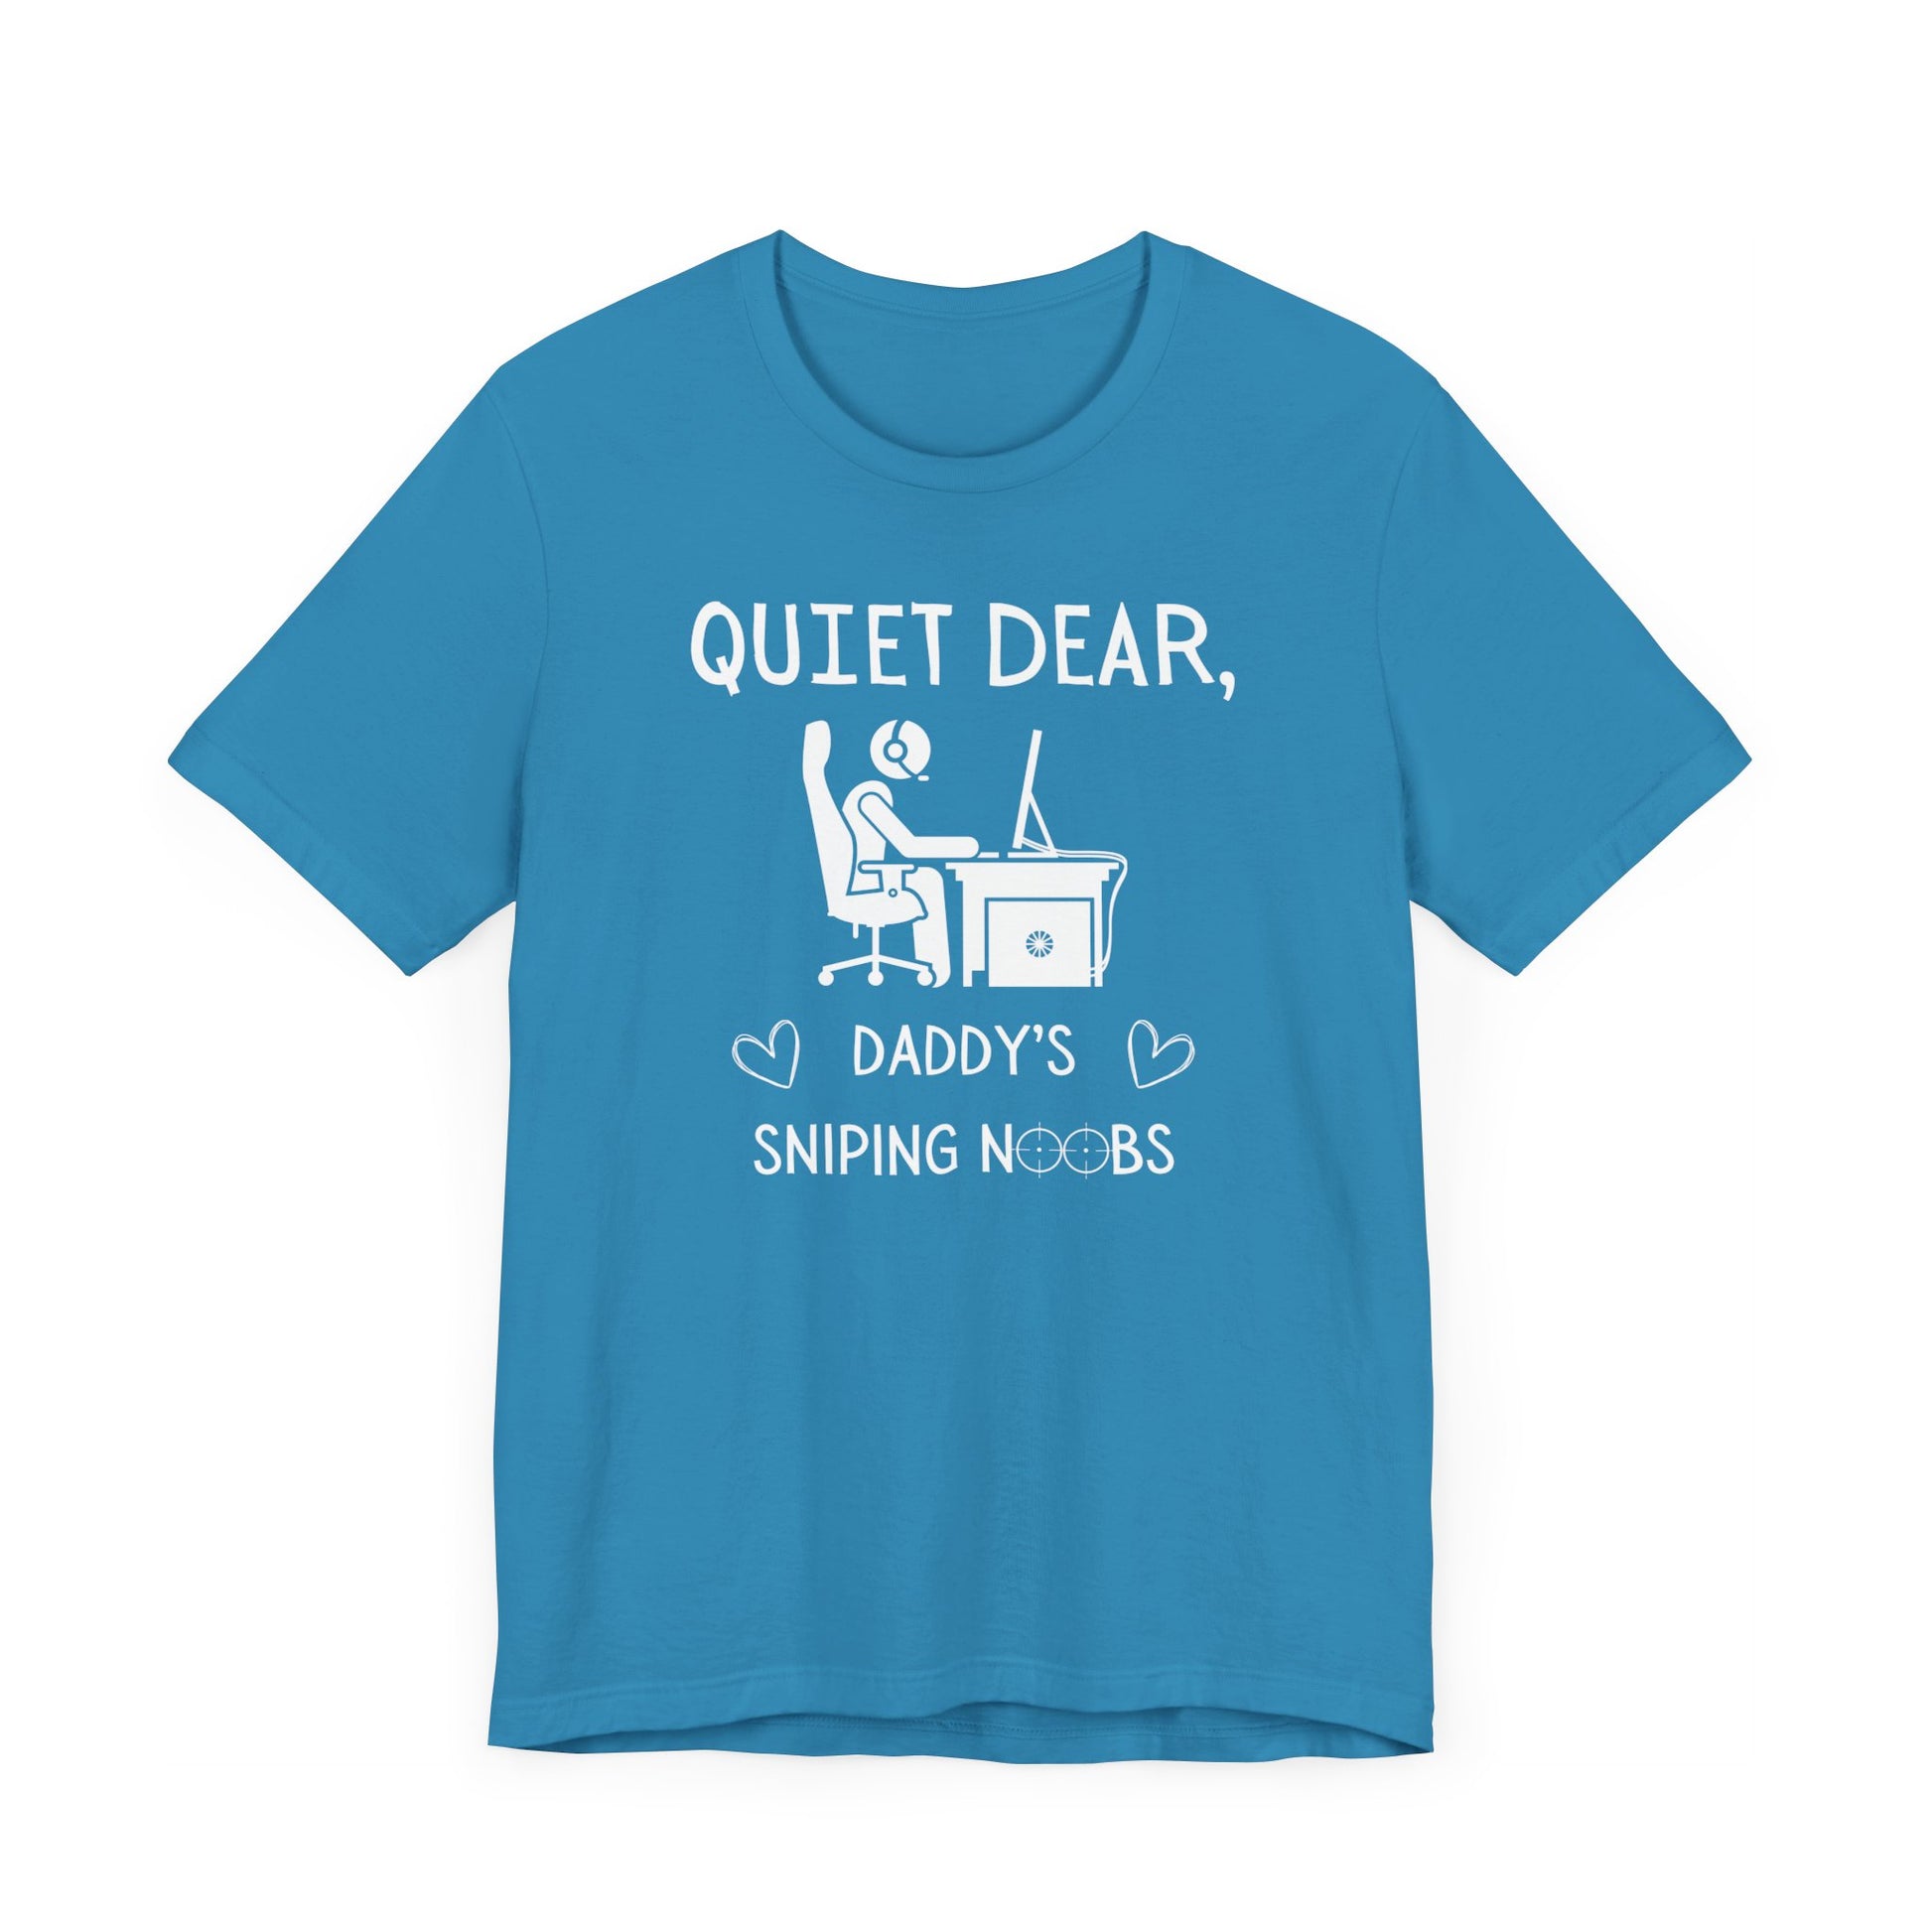 A flat image of an aqua t-shirt that reads Quiet Dear, Daddy's Sniping Noobs in white text. The lower text is framed by two hearts, and the O's are in the shape of sniper scopes. In the center of the shirt is an image of a person at a desk with a gaming PC.